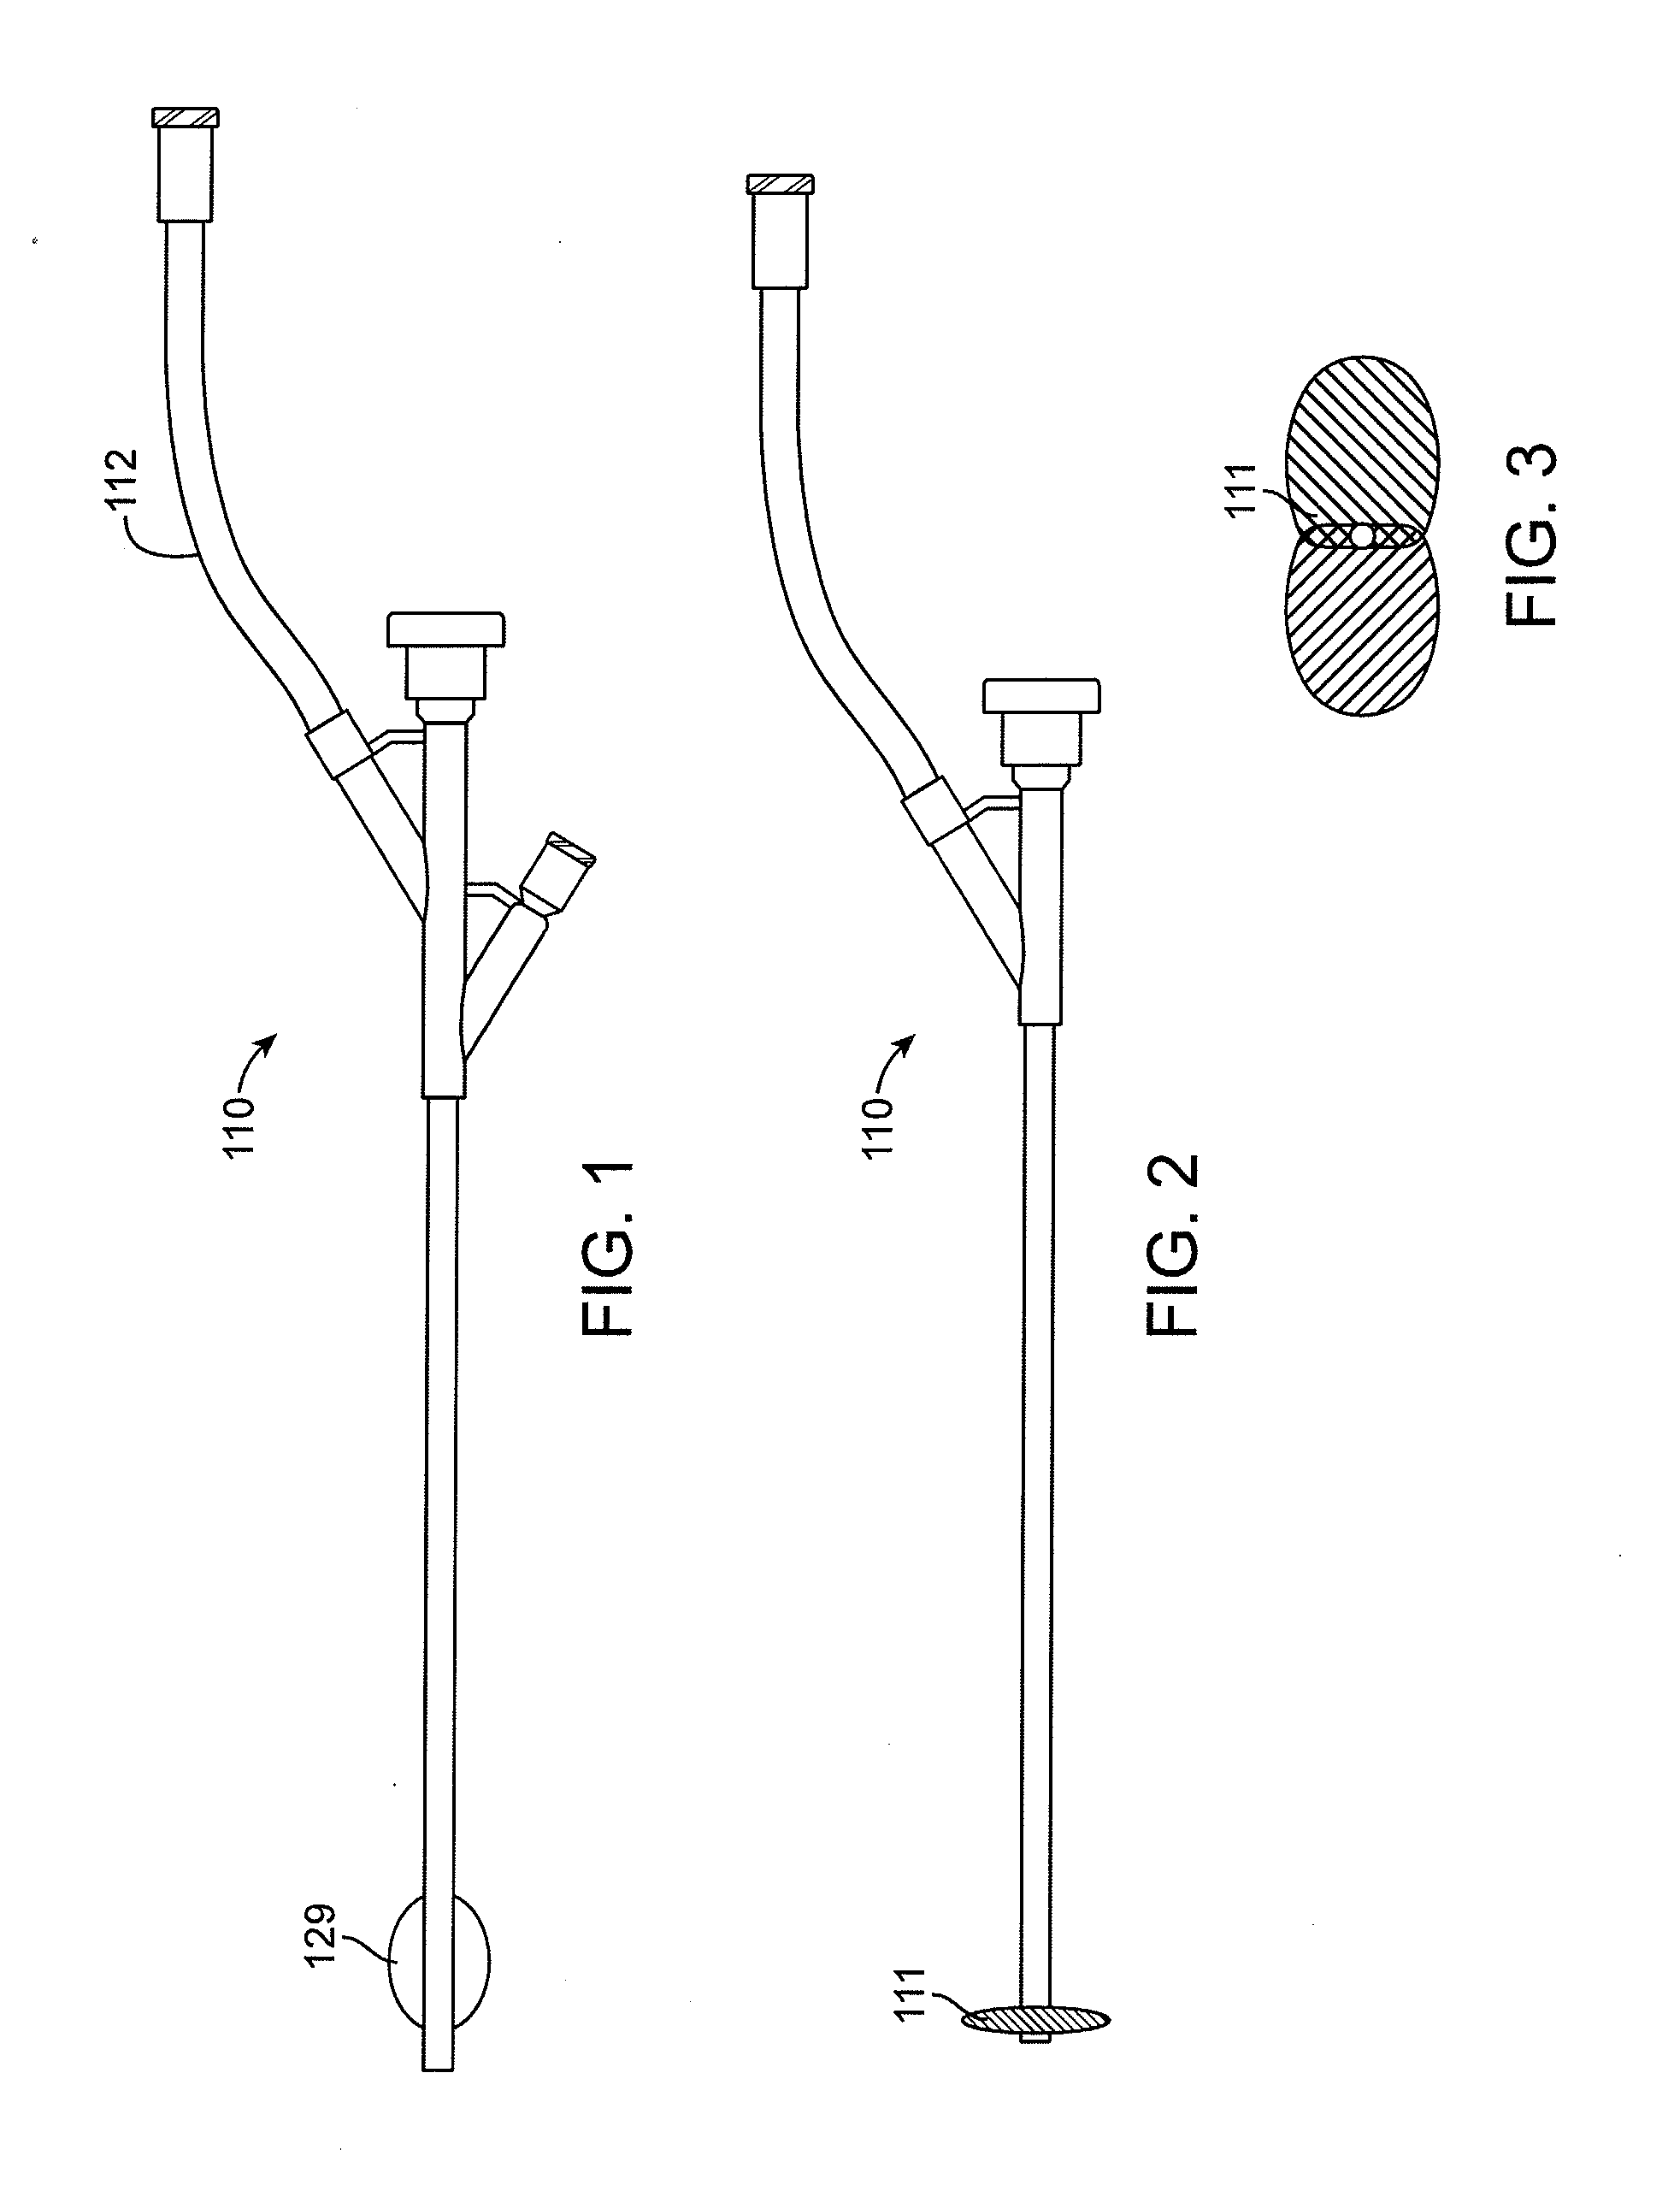 Systems and methods for transcatheter aortic valve treatment